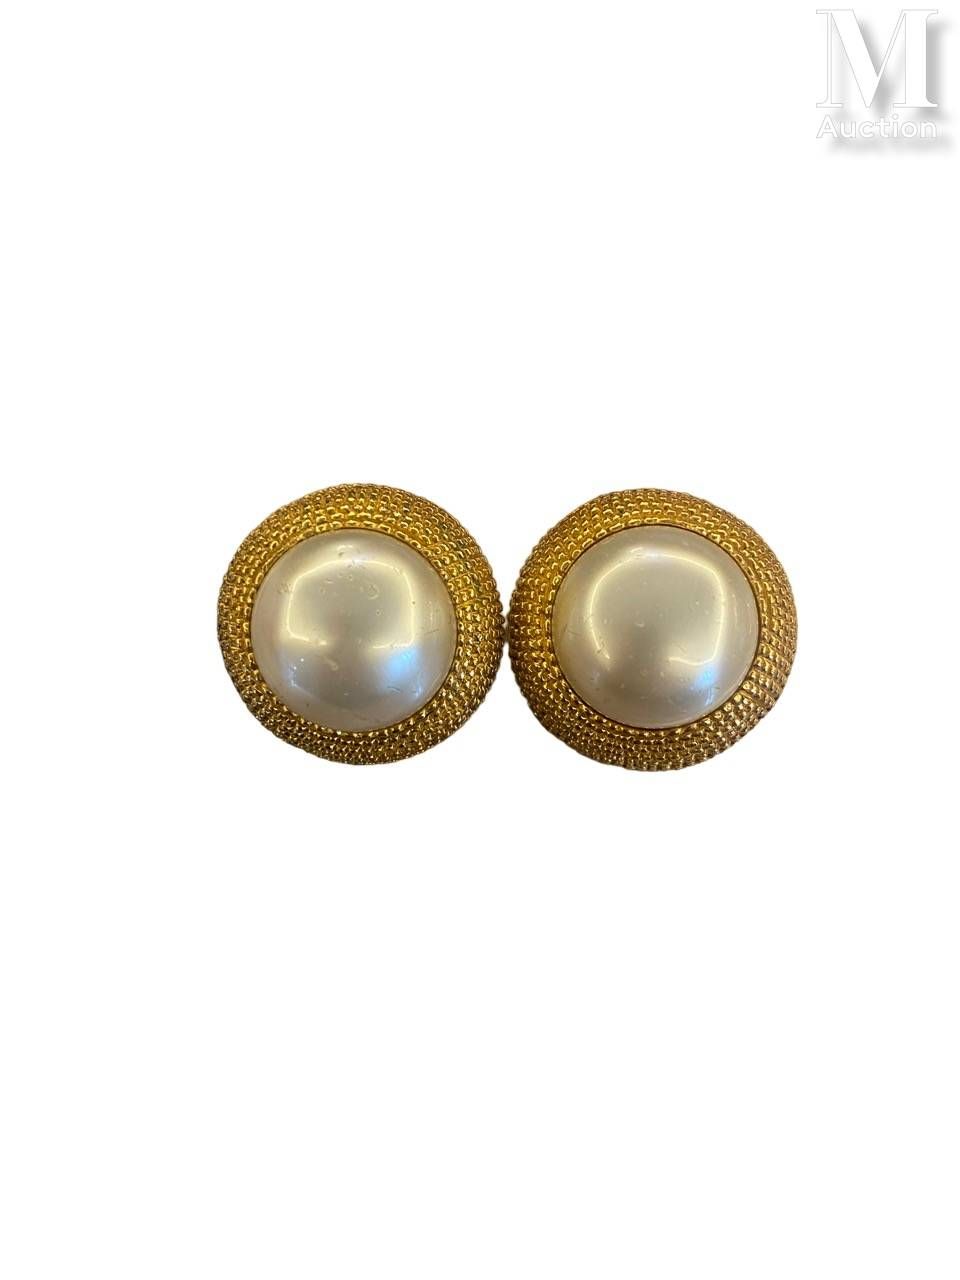 CHANEL Pair of ear clips
in gold-plated metal and imitation pearls
Signed on a p&hellip;